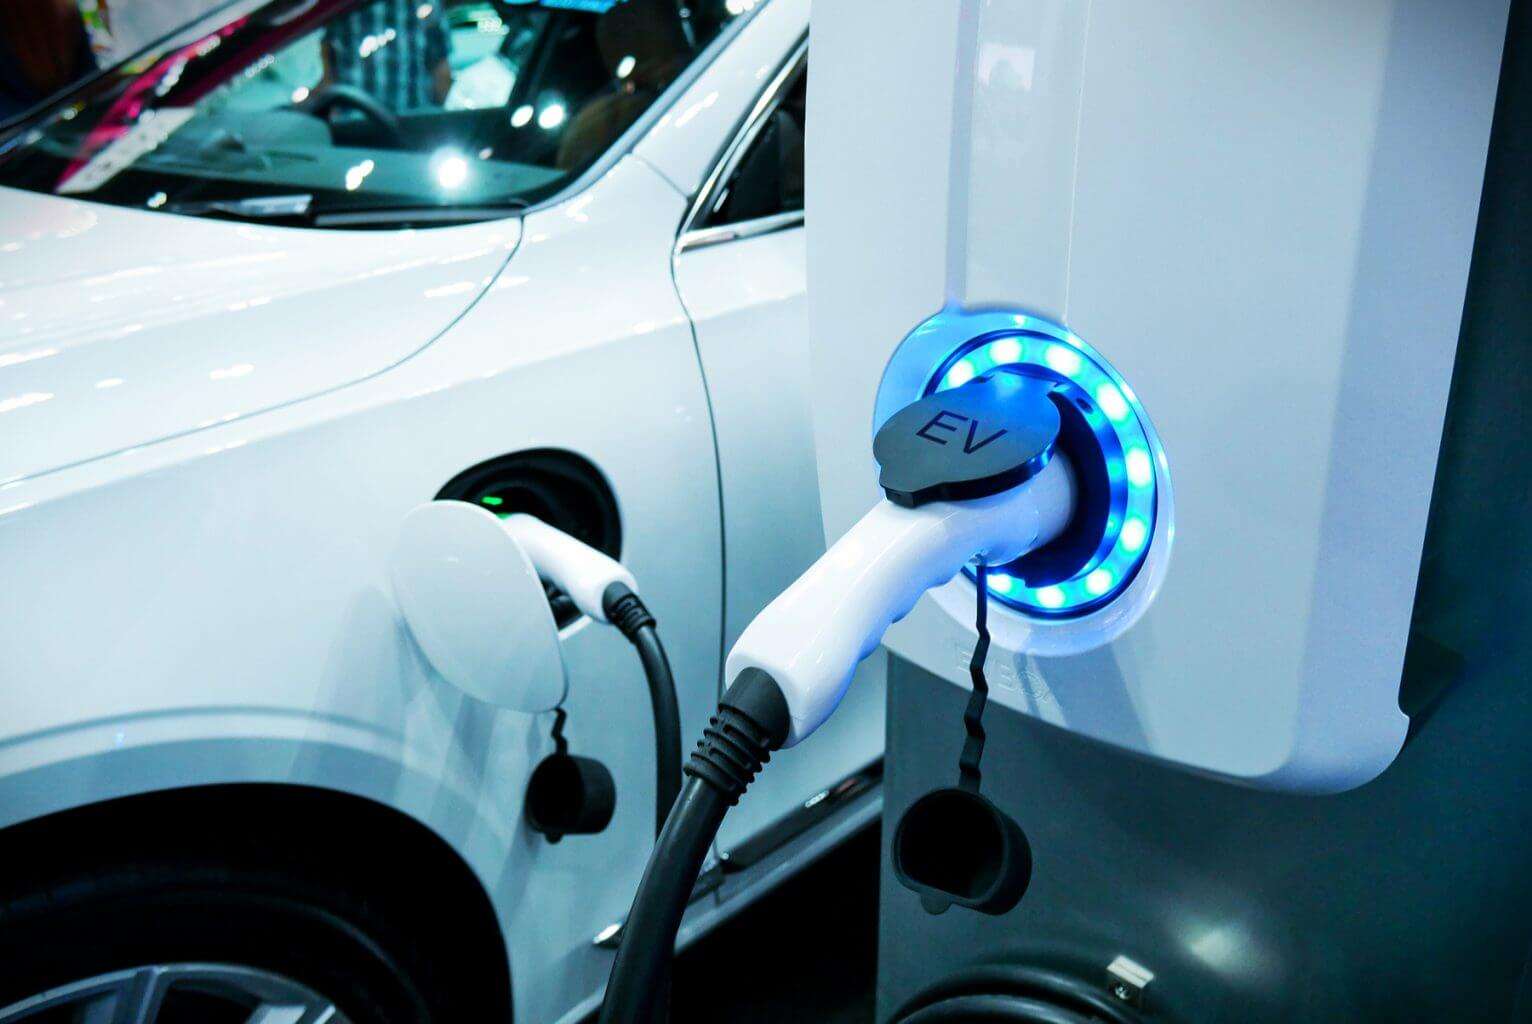 What are the advantages of electric cars over the gasoline ones?